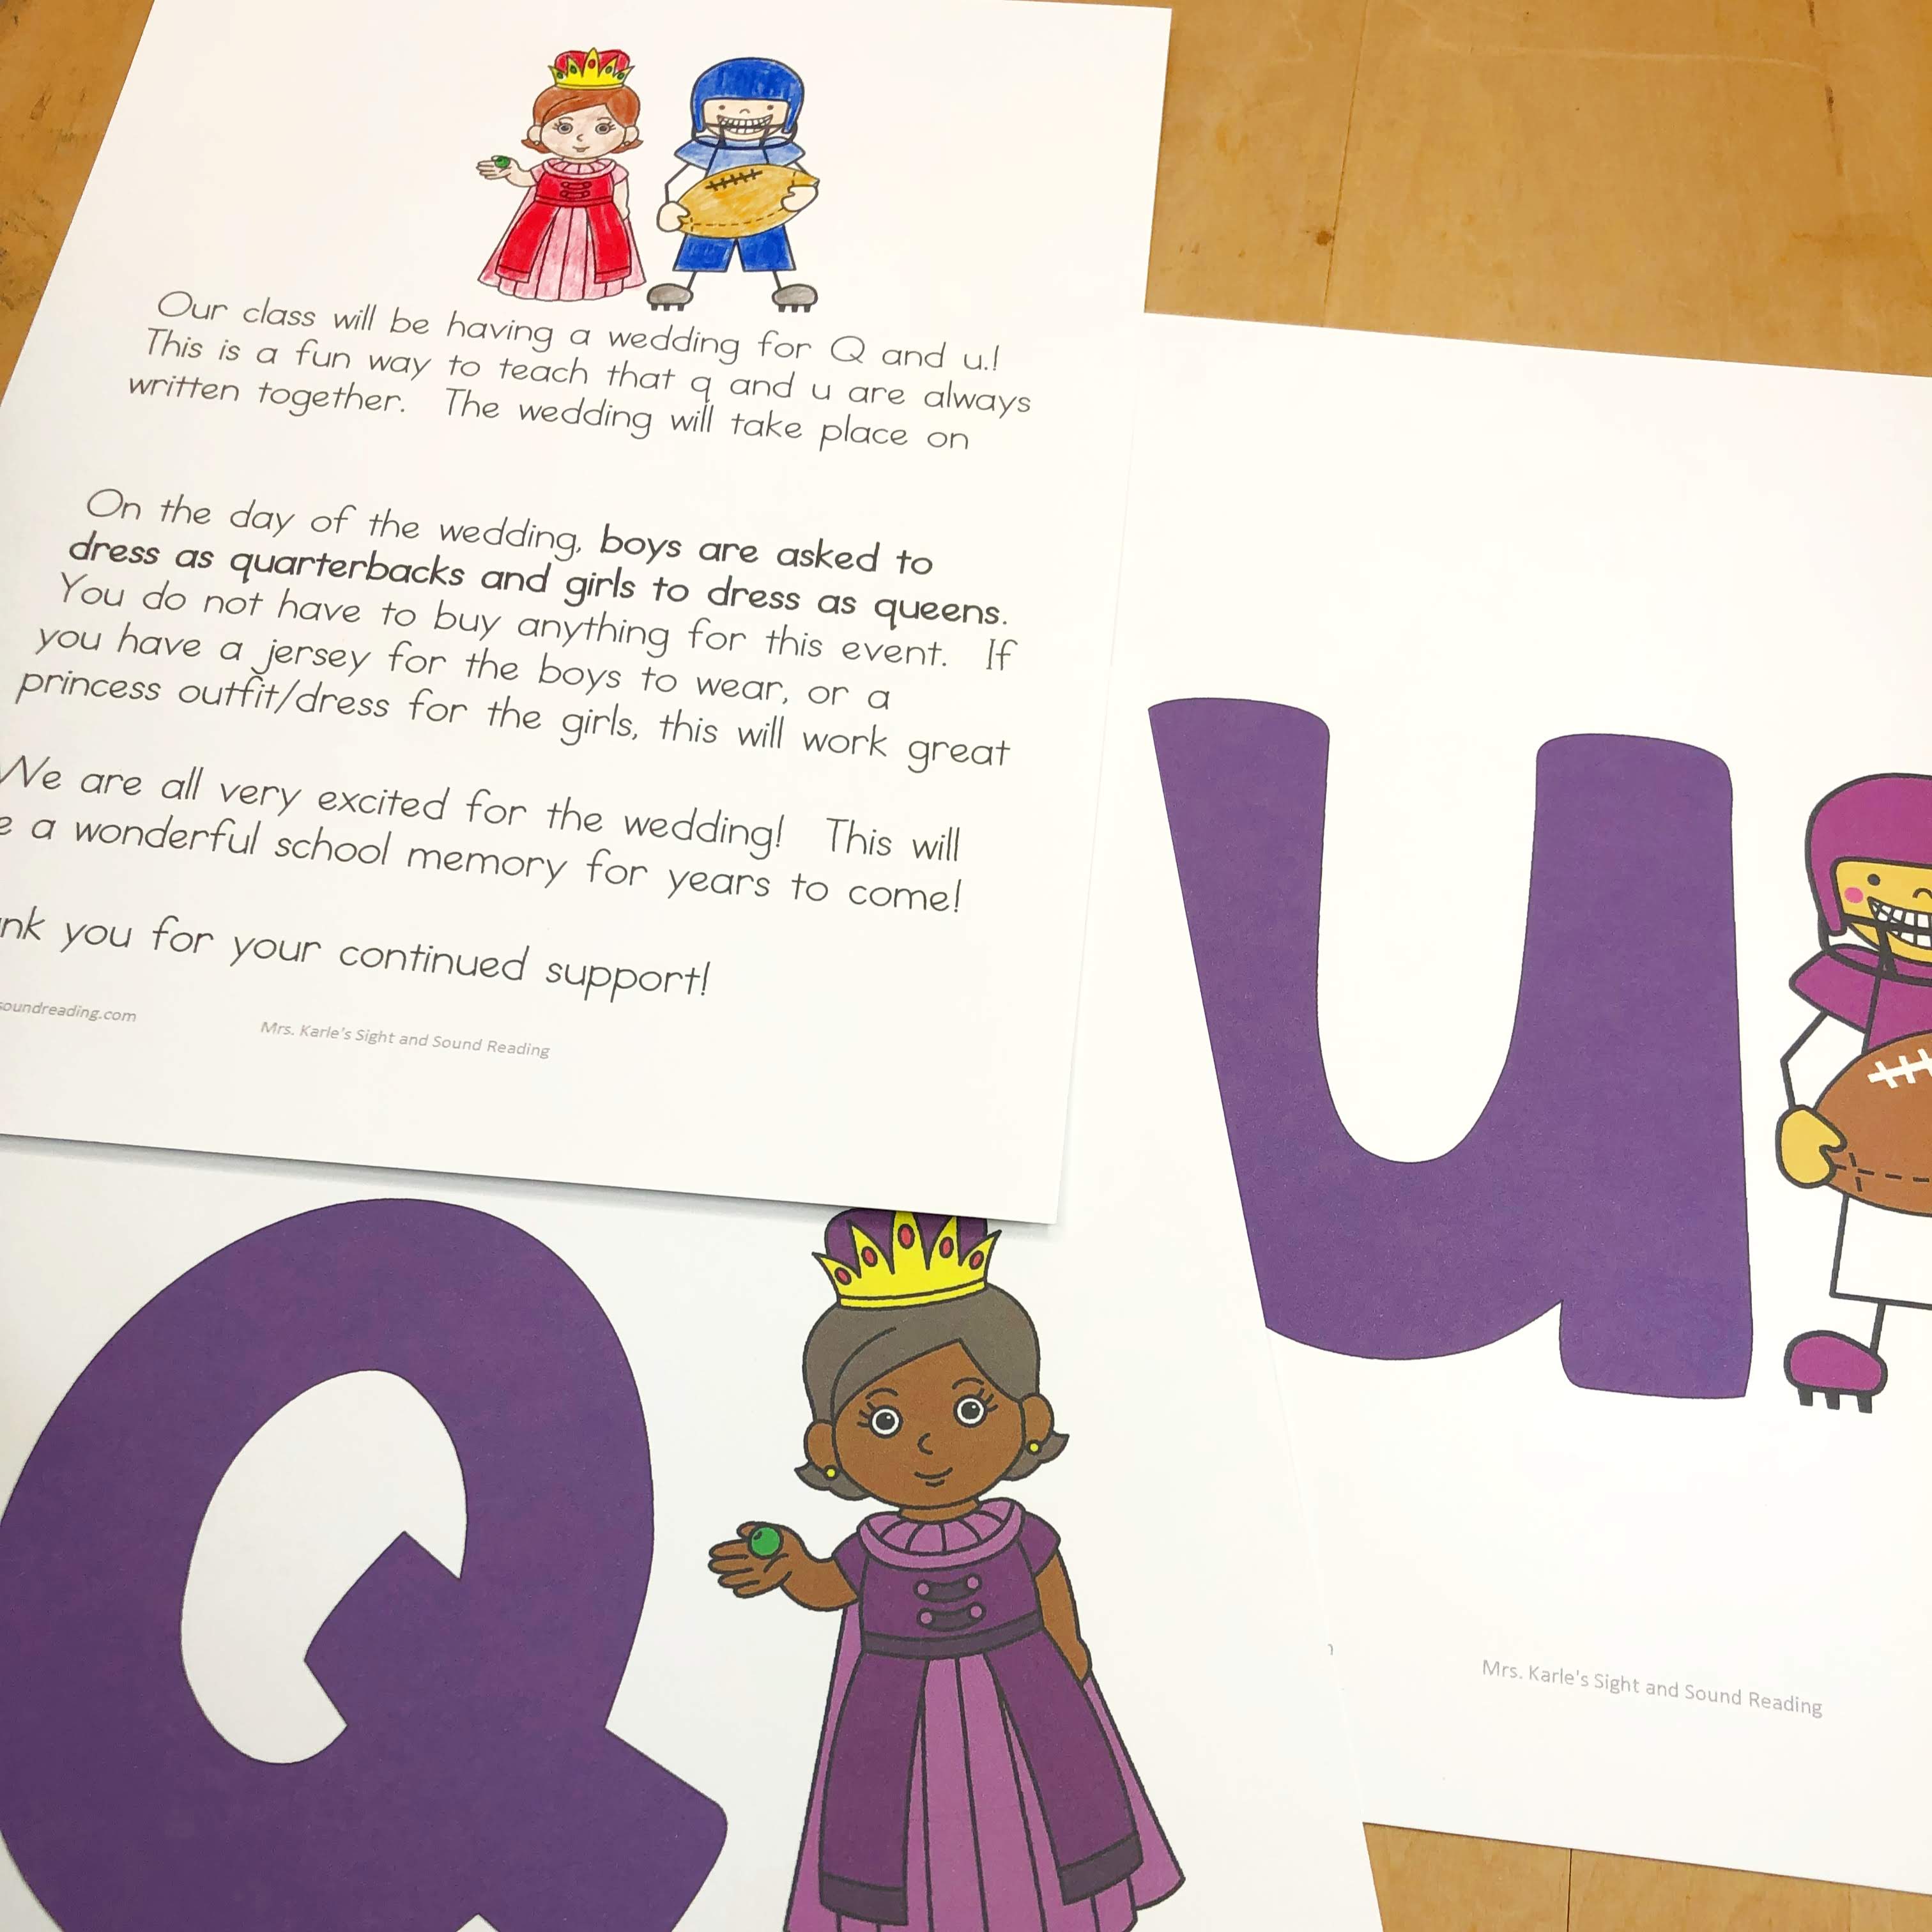 q-and-u-wedding-invitations-vows-activities-and-crowns-fun-letter-q